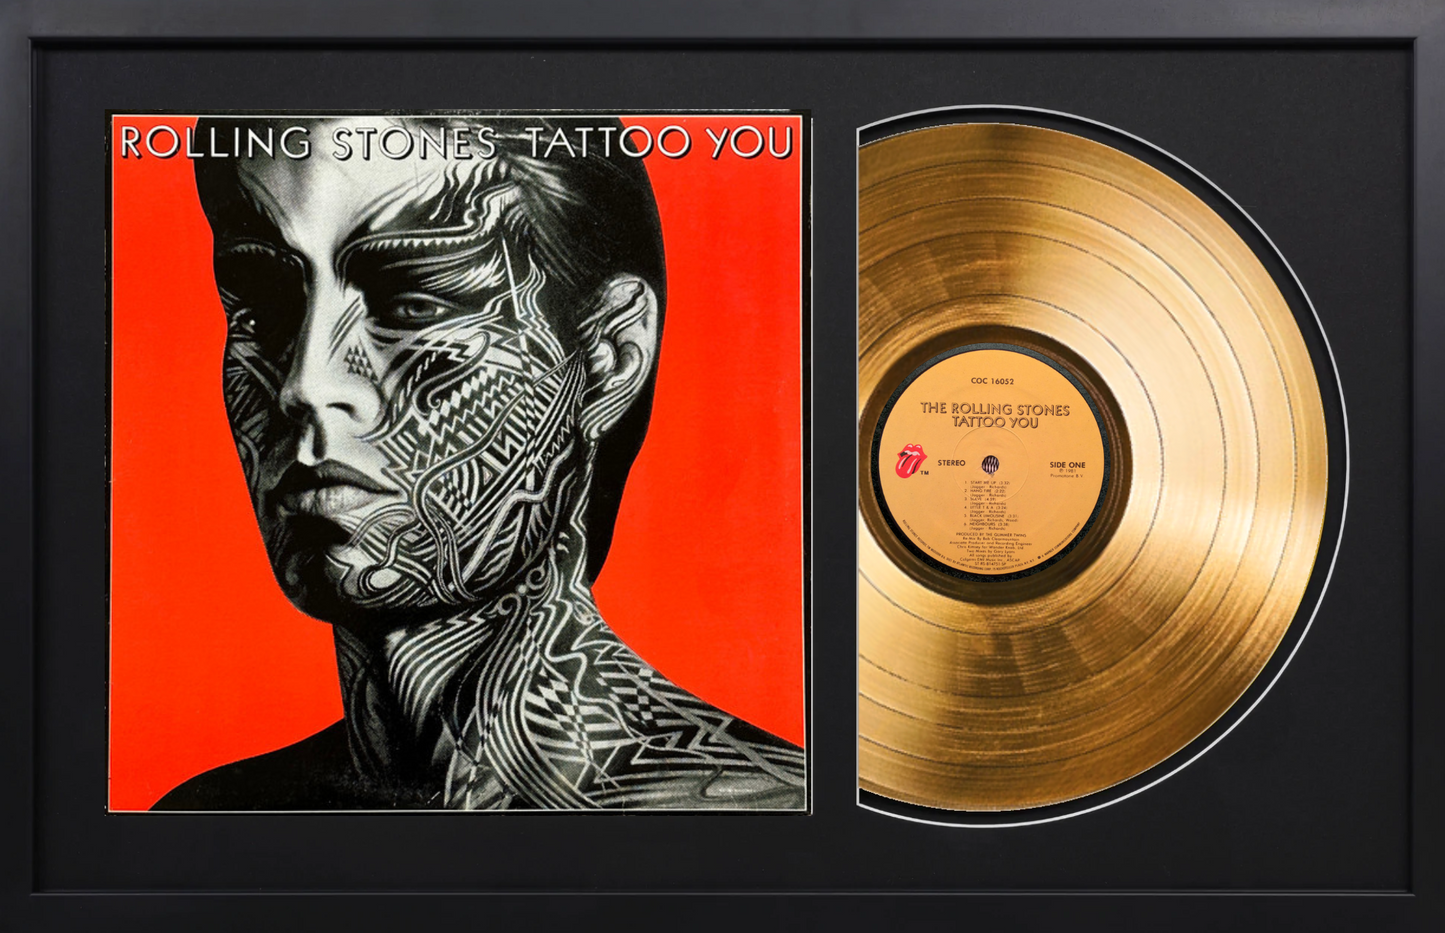 The Rolling Stones - Tattoo You - 14K Gold Framed Album